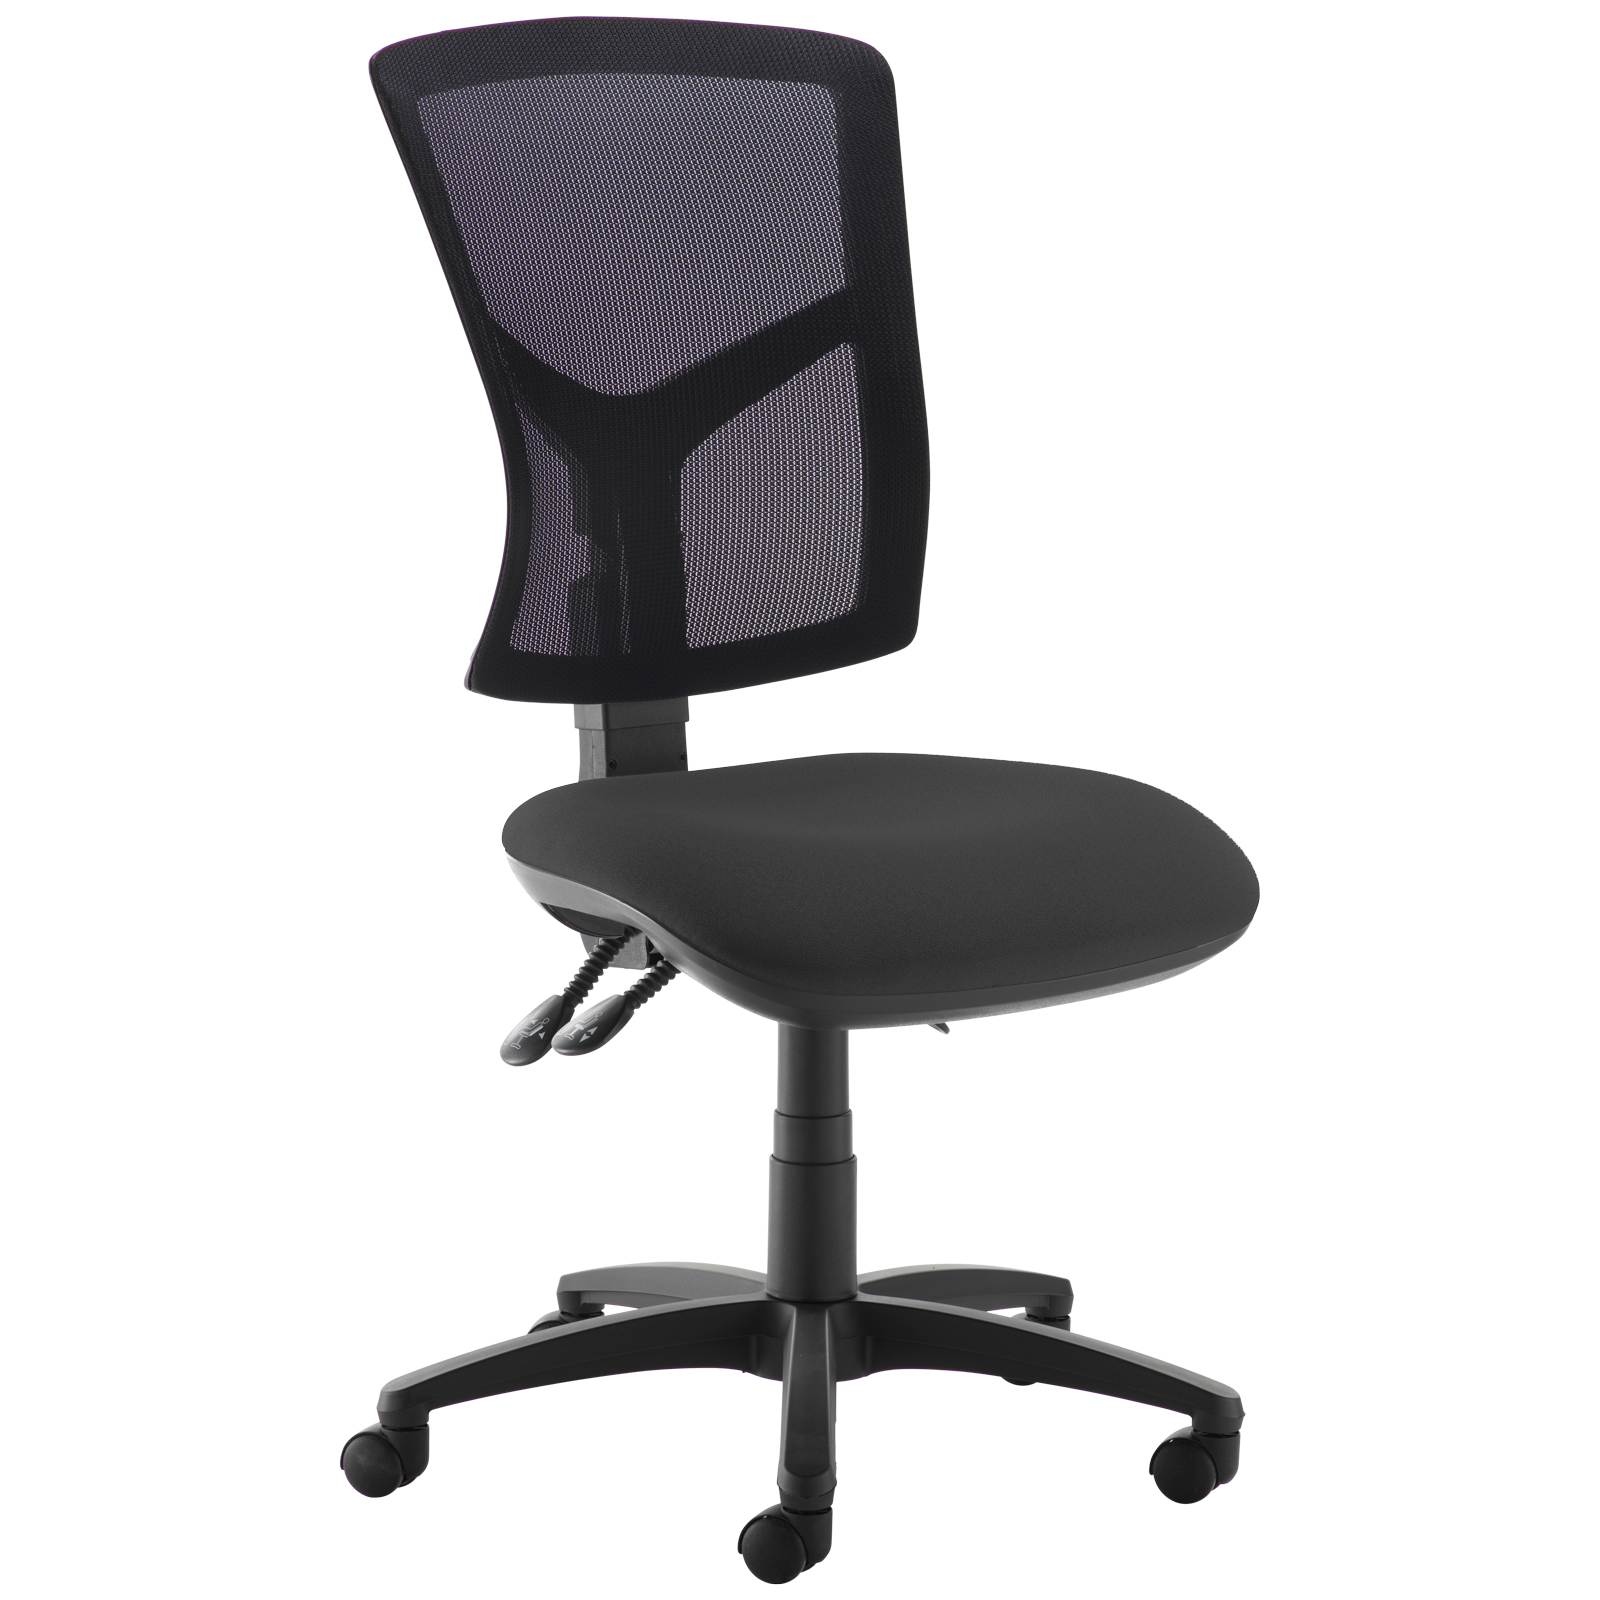 Senza high mesh back operator chair with no arms - black